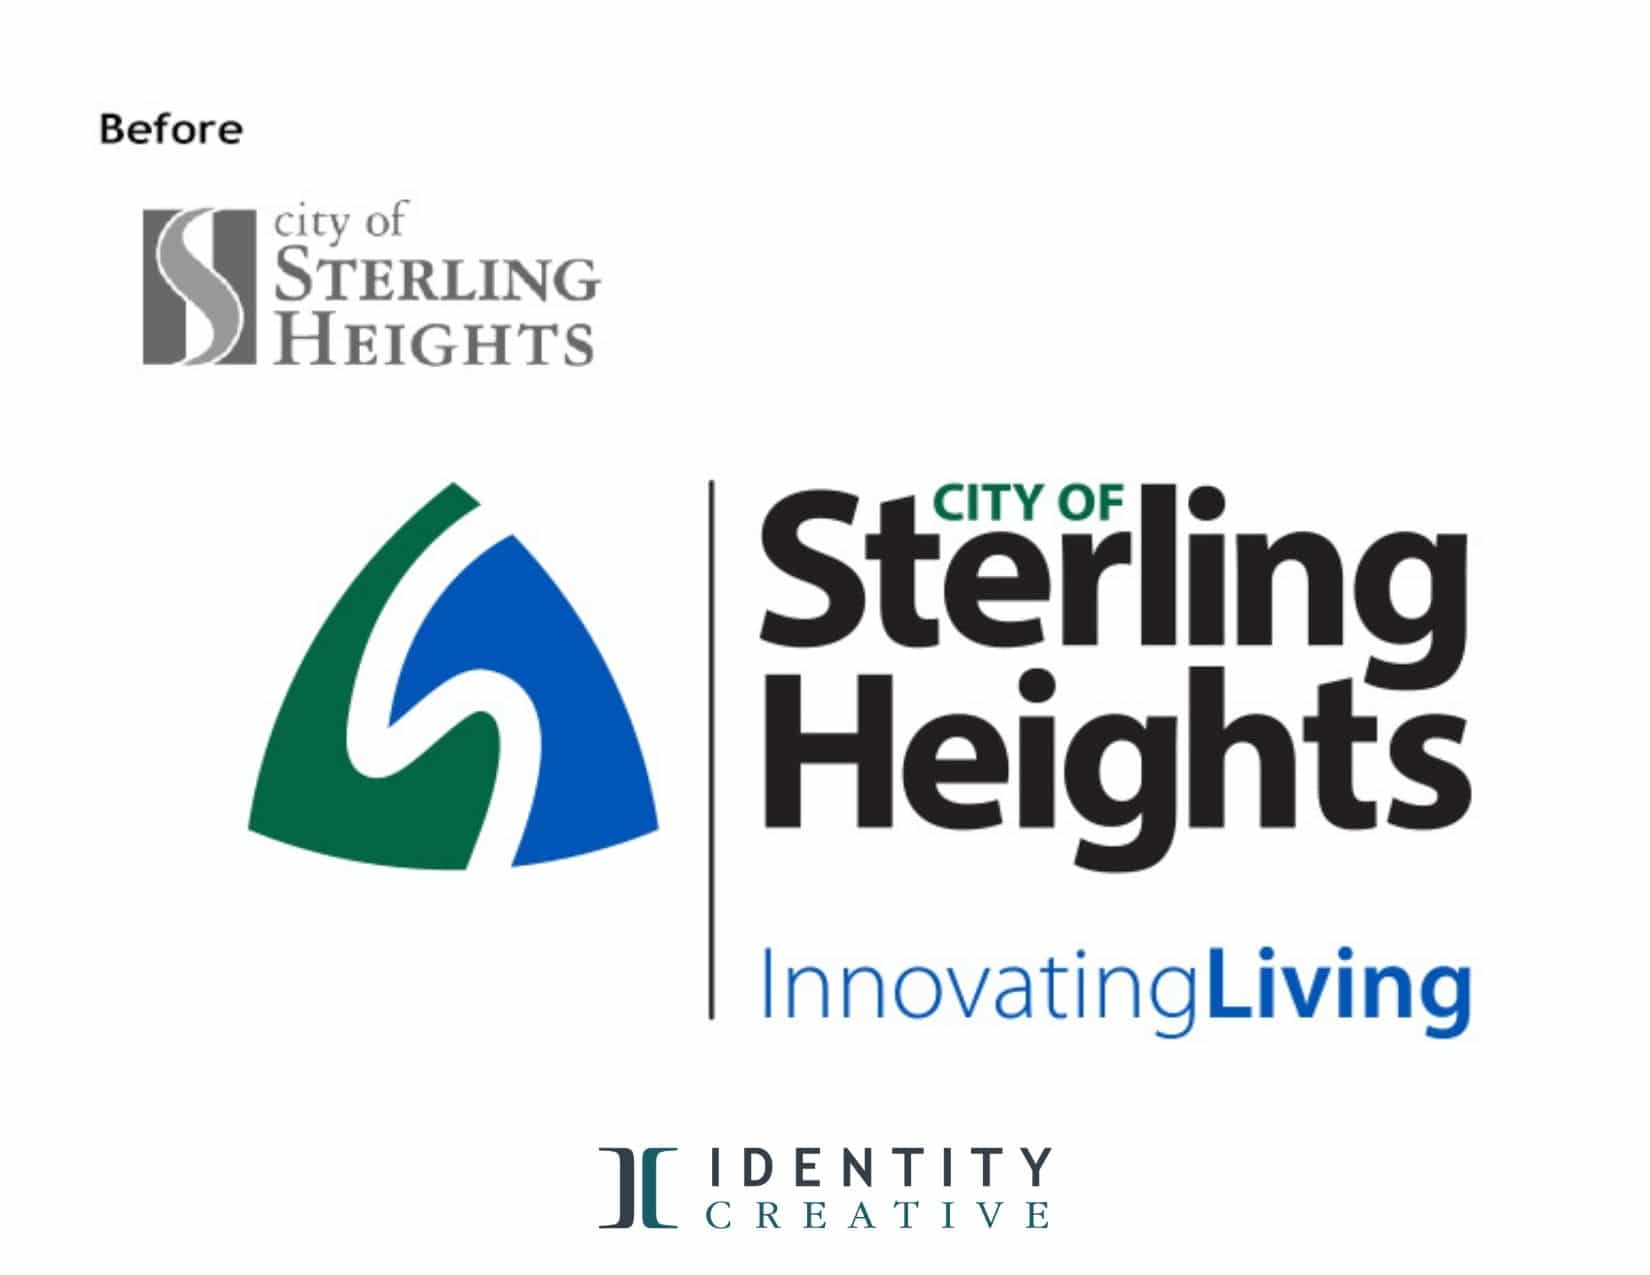 The City of Sterling Heights: Place Branding by Identity Creative